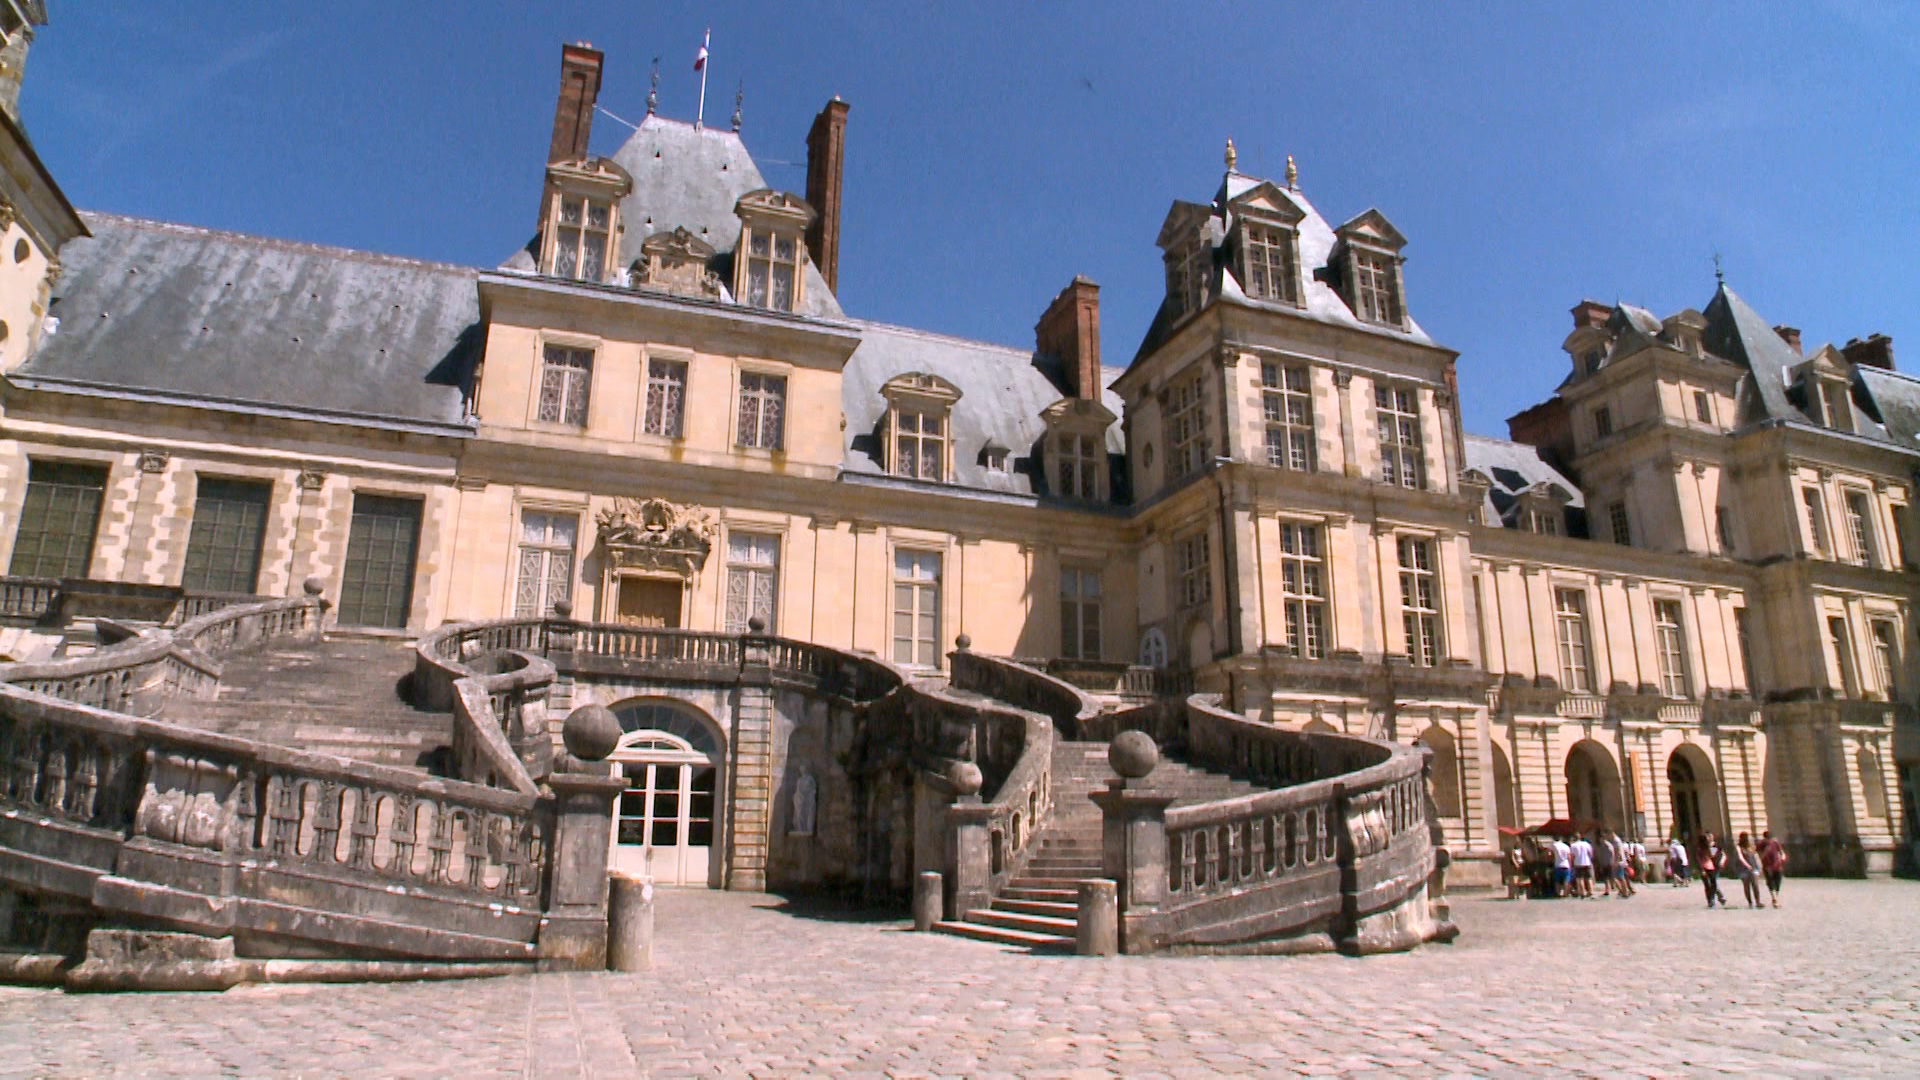 The country of Fontainebleau